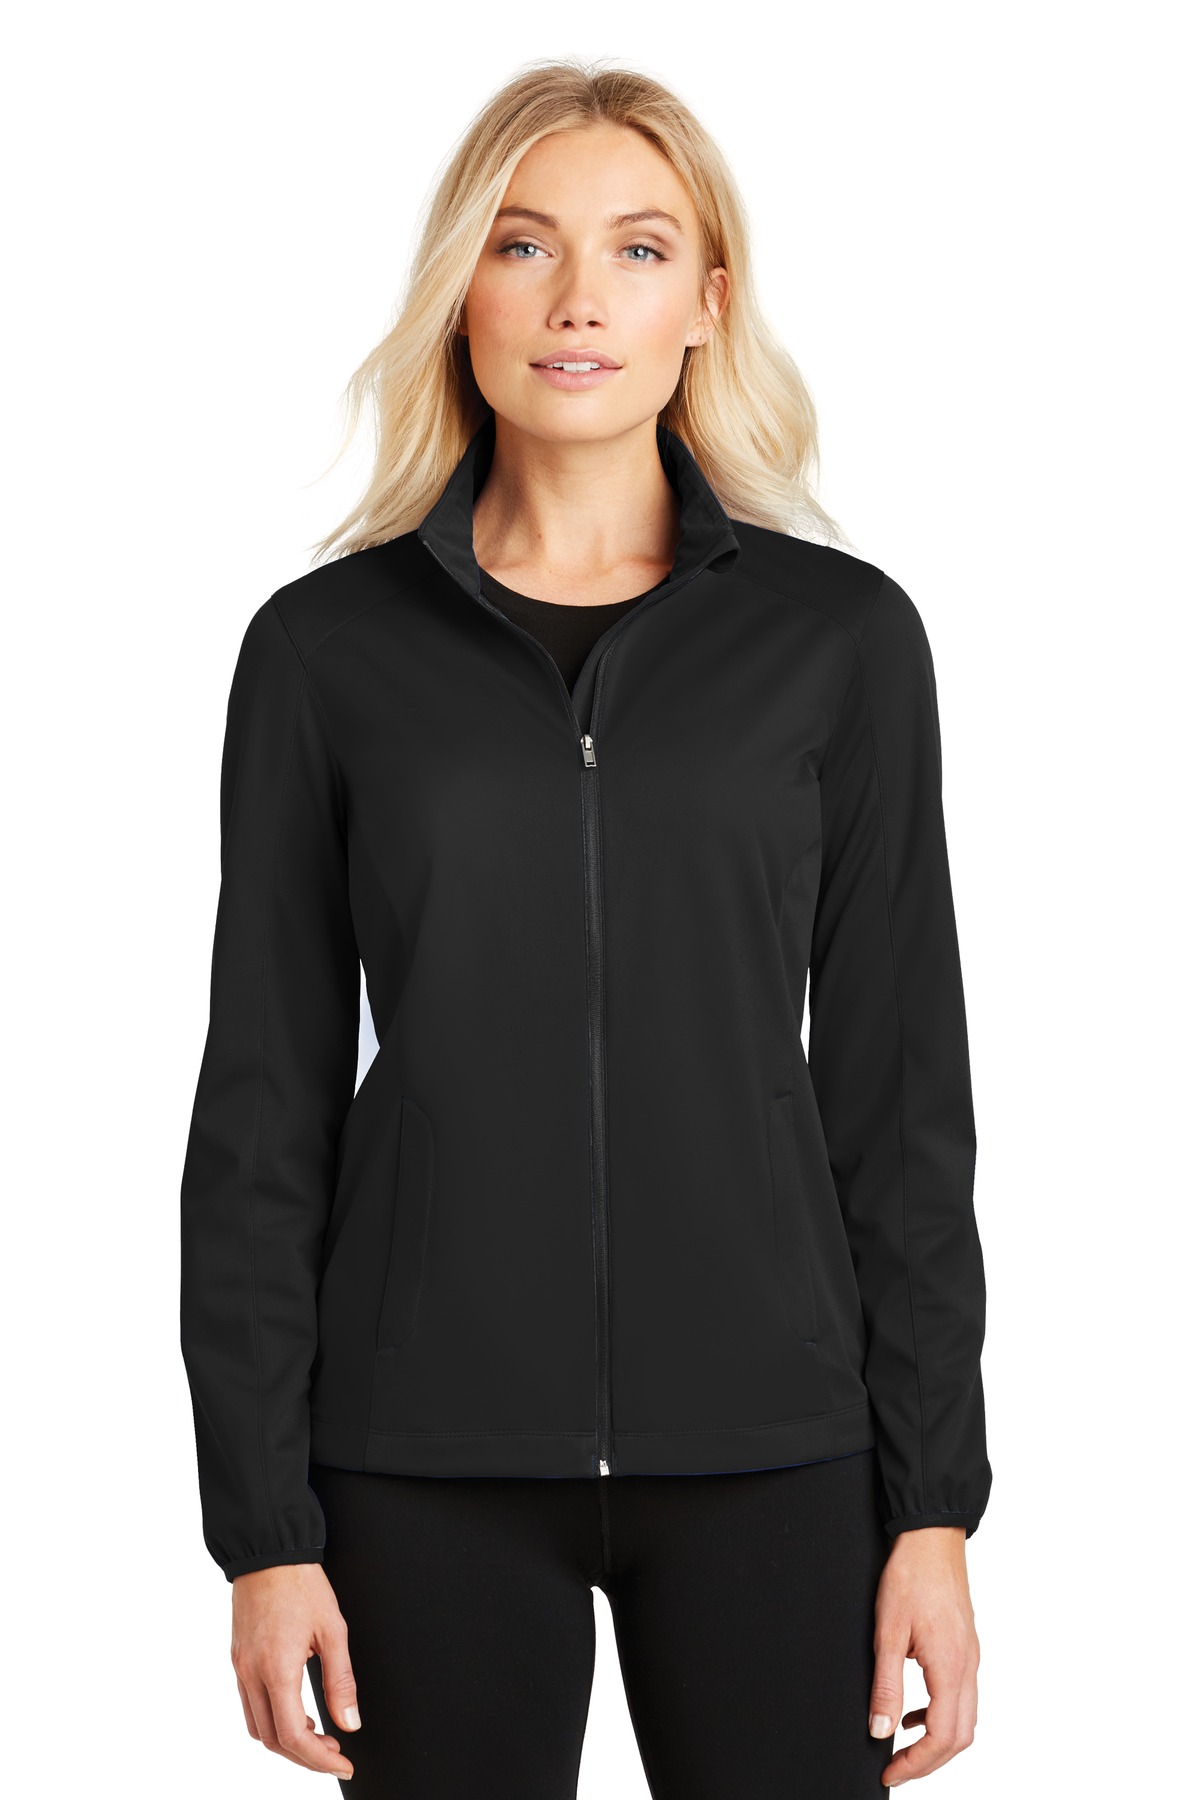 Port Authority Ladies Outerwear for Corporate & Hospitality ® Ladies Active Soft Shell Jacket.-Port Authority